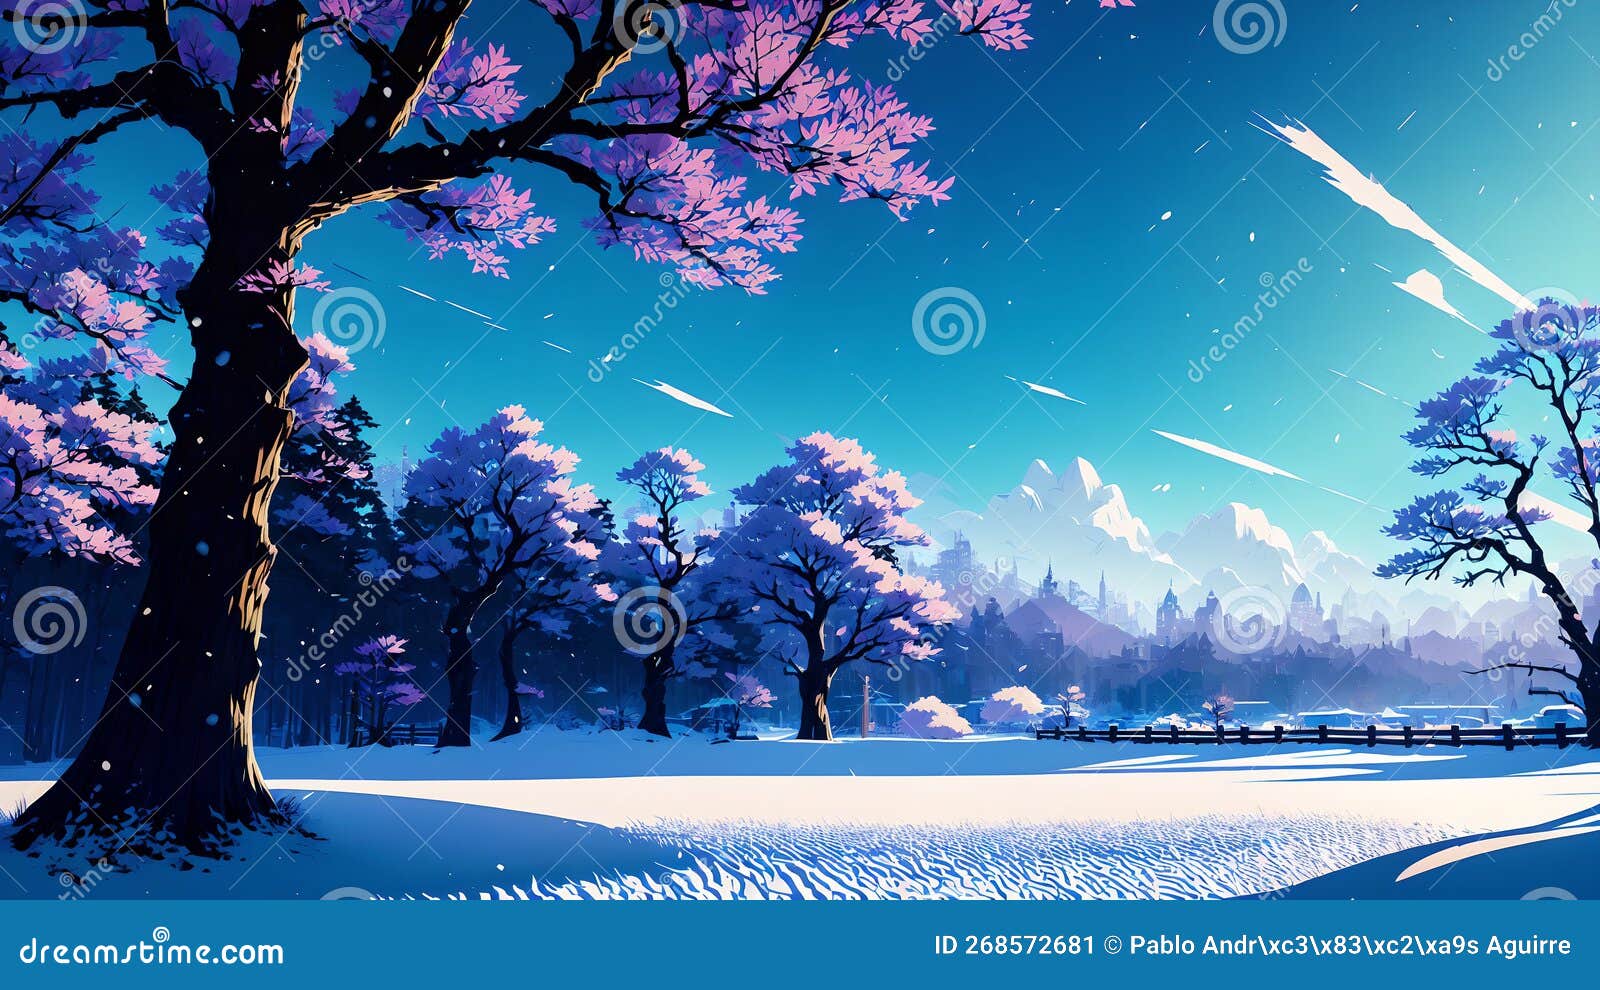 Snow Outside  2016  Anime backgrounds wallpapers Anime scenery wallpaper  Anime background